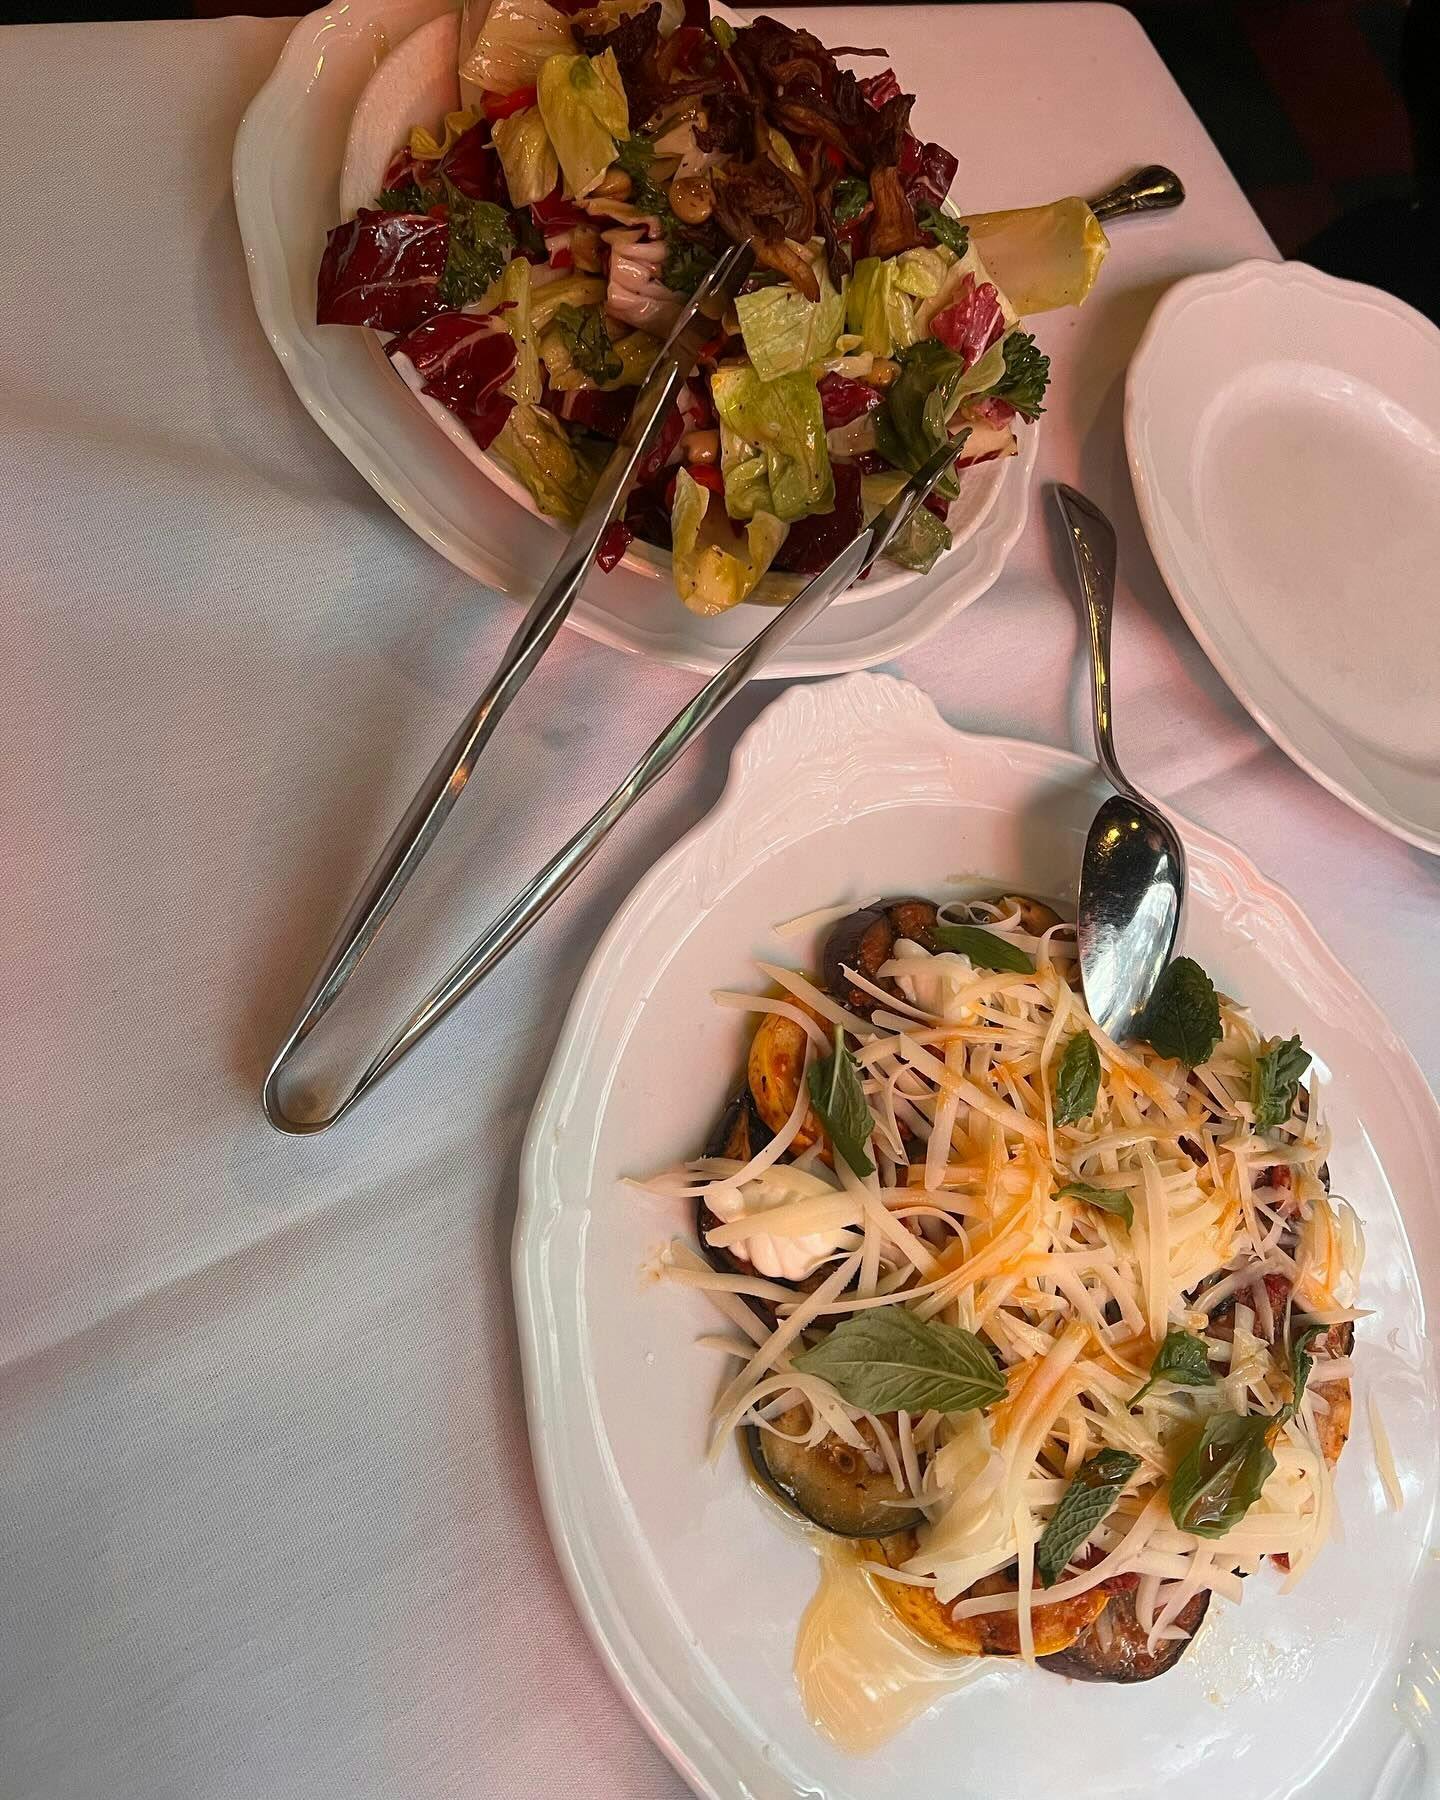 Fresh garden salad and a plate of pasta with sautéed mushrooms and grated cheese, served in an elegant dining setting, reflecting the fresh, high-quality ingredients offered by New York's top restaurants on Booked.